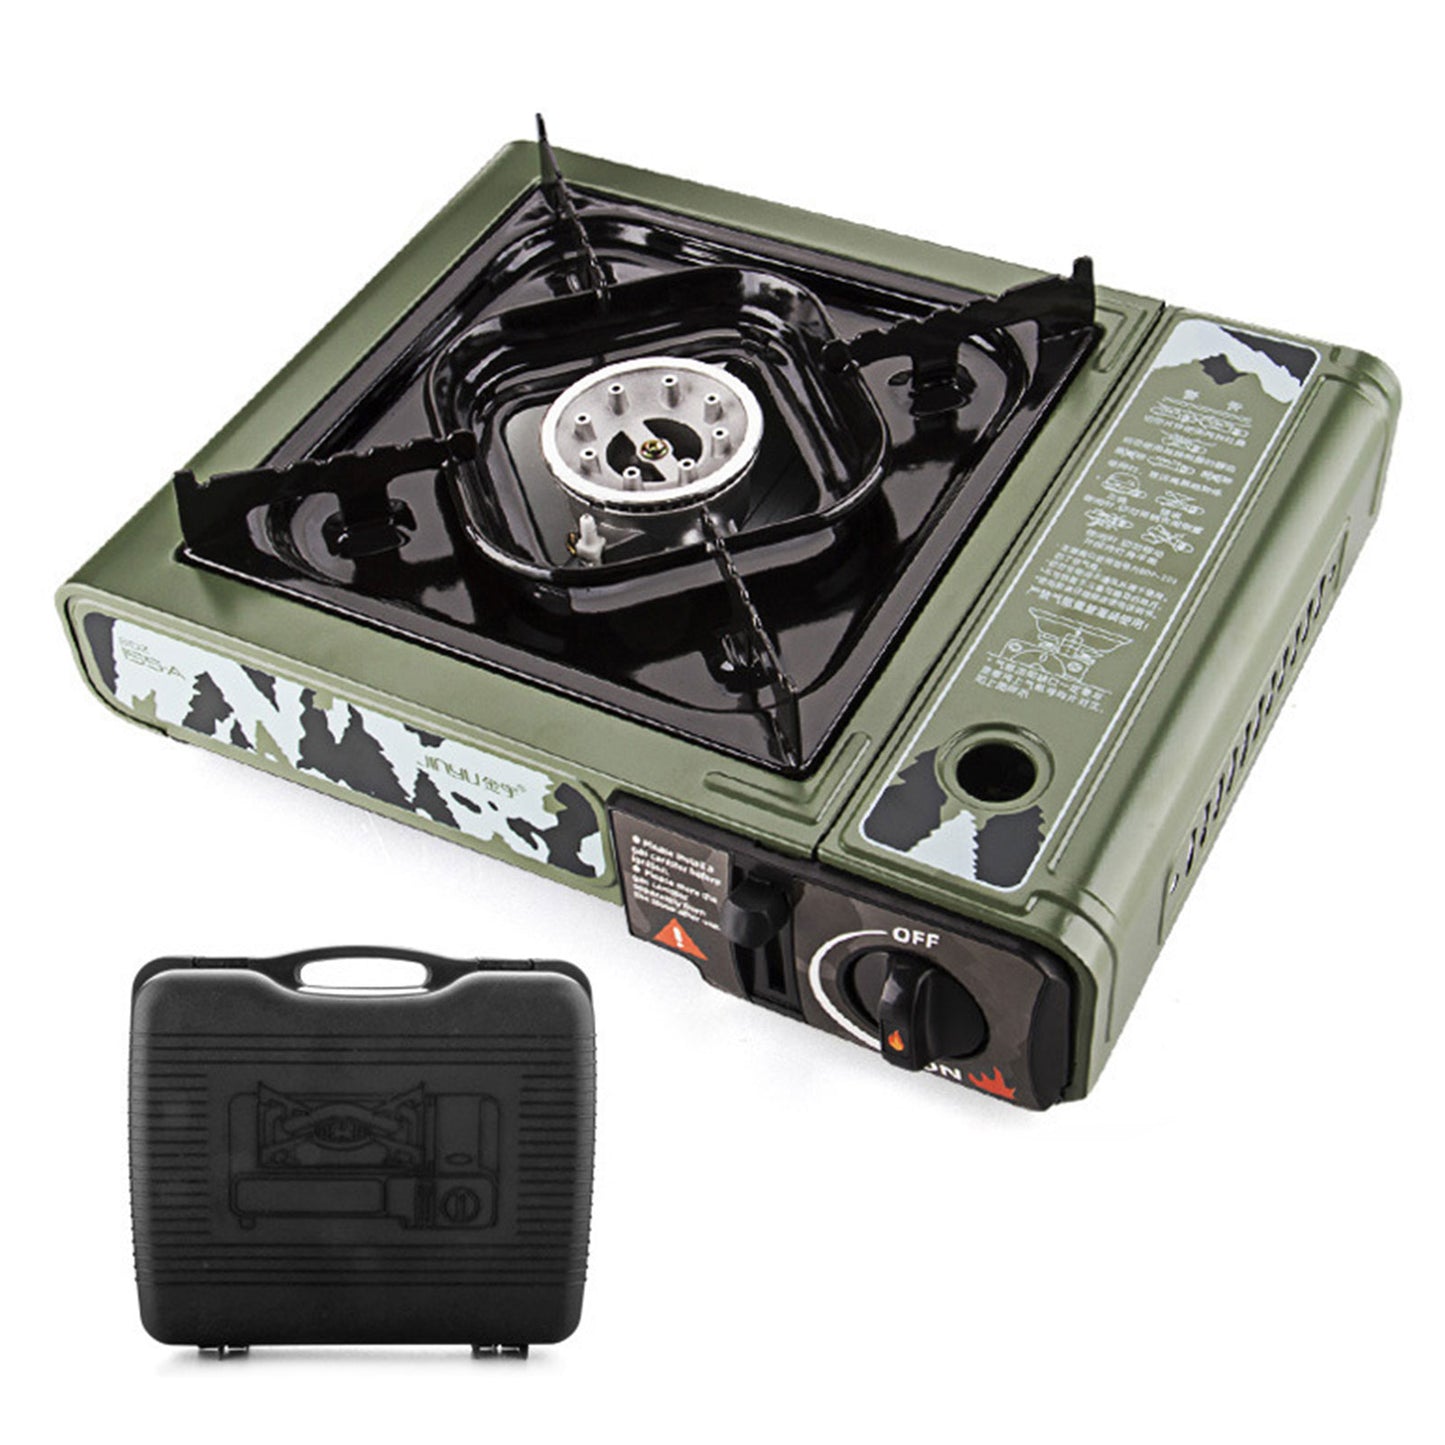 Portable Gas Stove With Map Hot Pot Waska Fuel Tank Barbecue Outdoor Camping Stove